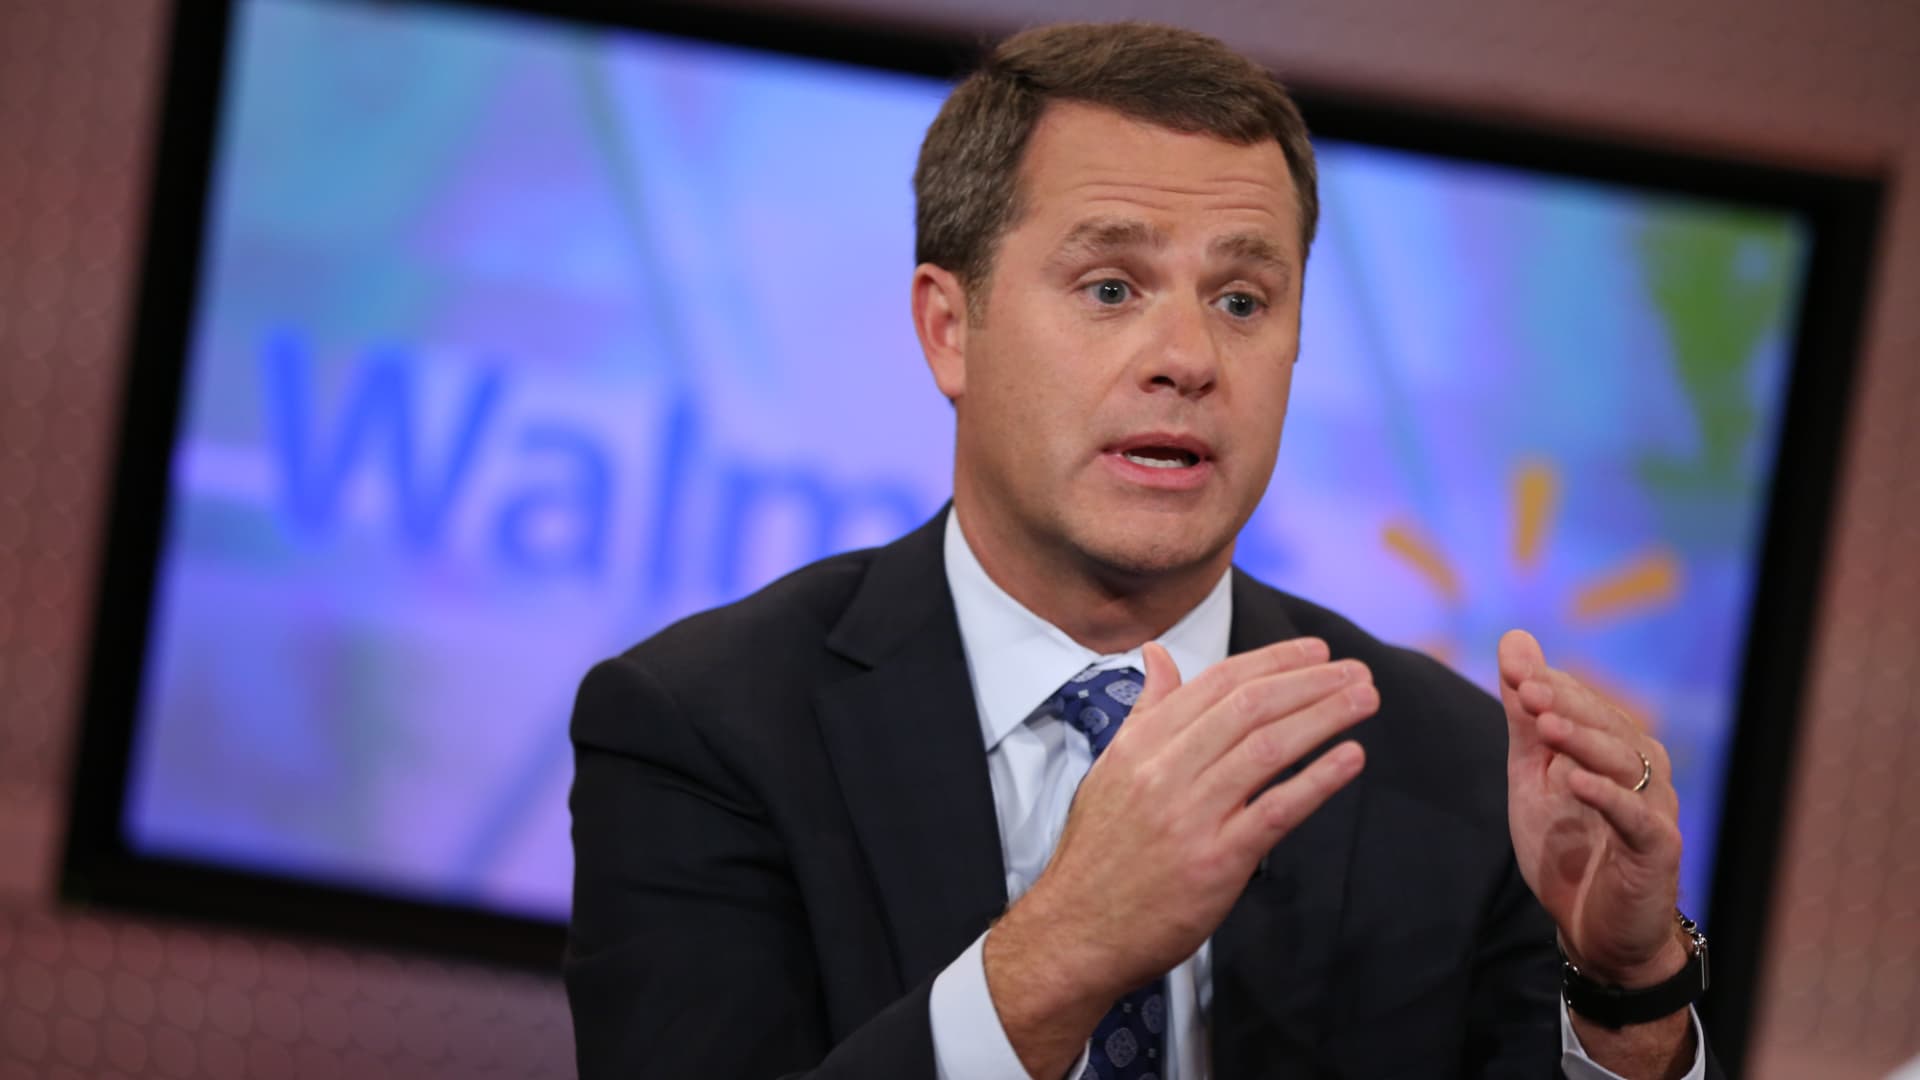 Walmart CEO Doug McMillon says even wealthier families are penny-pinching